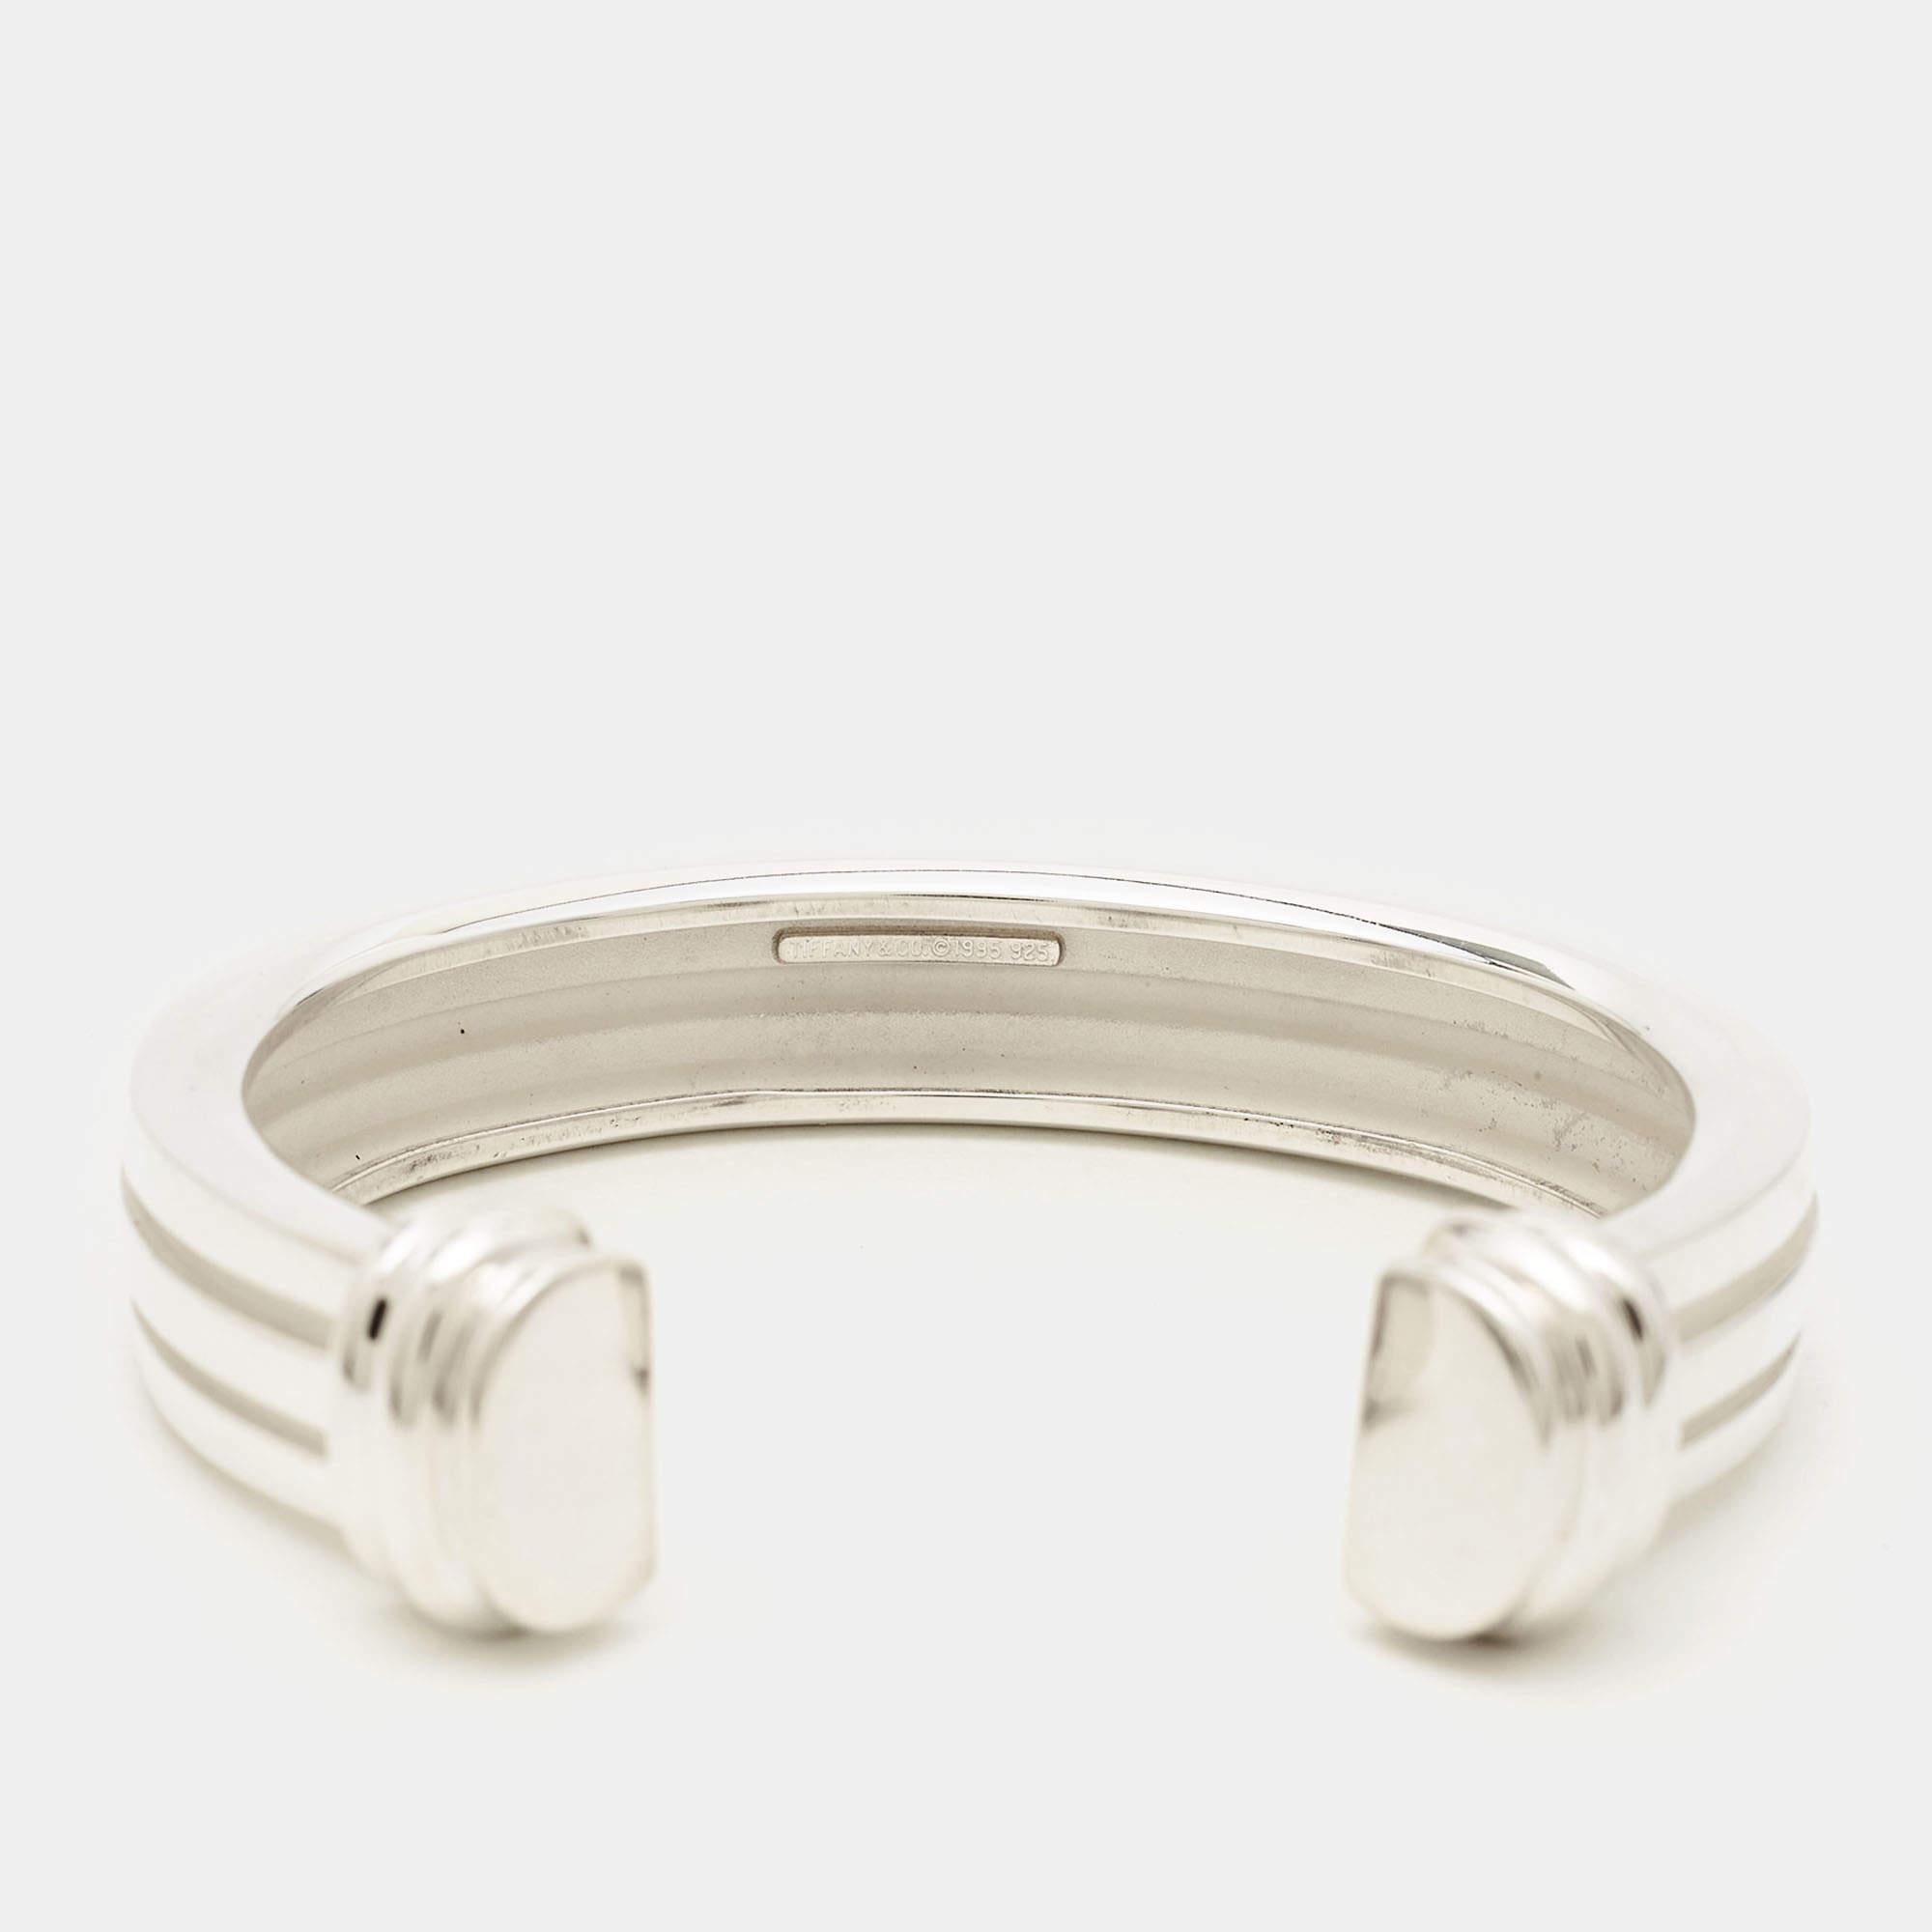 The Tiffany & Co. Atlas bracelet is an exquisite piece of jewelry that exudes elegance and sophistication. Made from high-quality sterling silver, it features a captivating groove design inspired by the iconic Atlas collection, making it a timeless